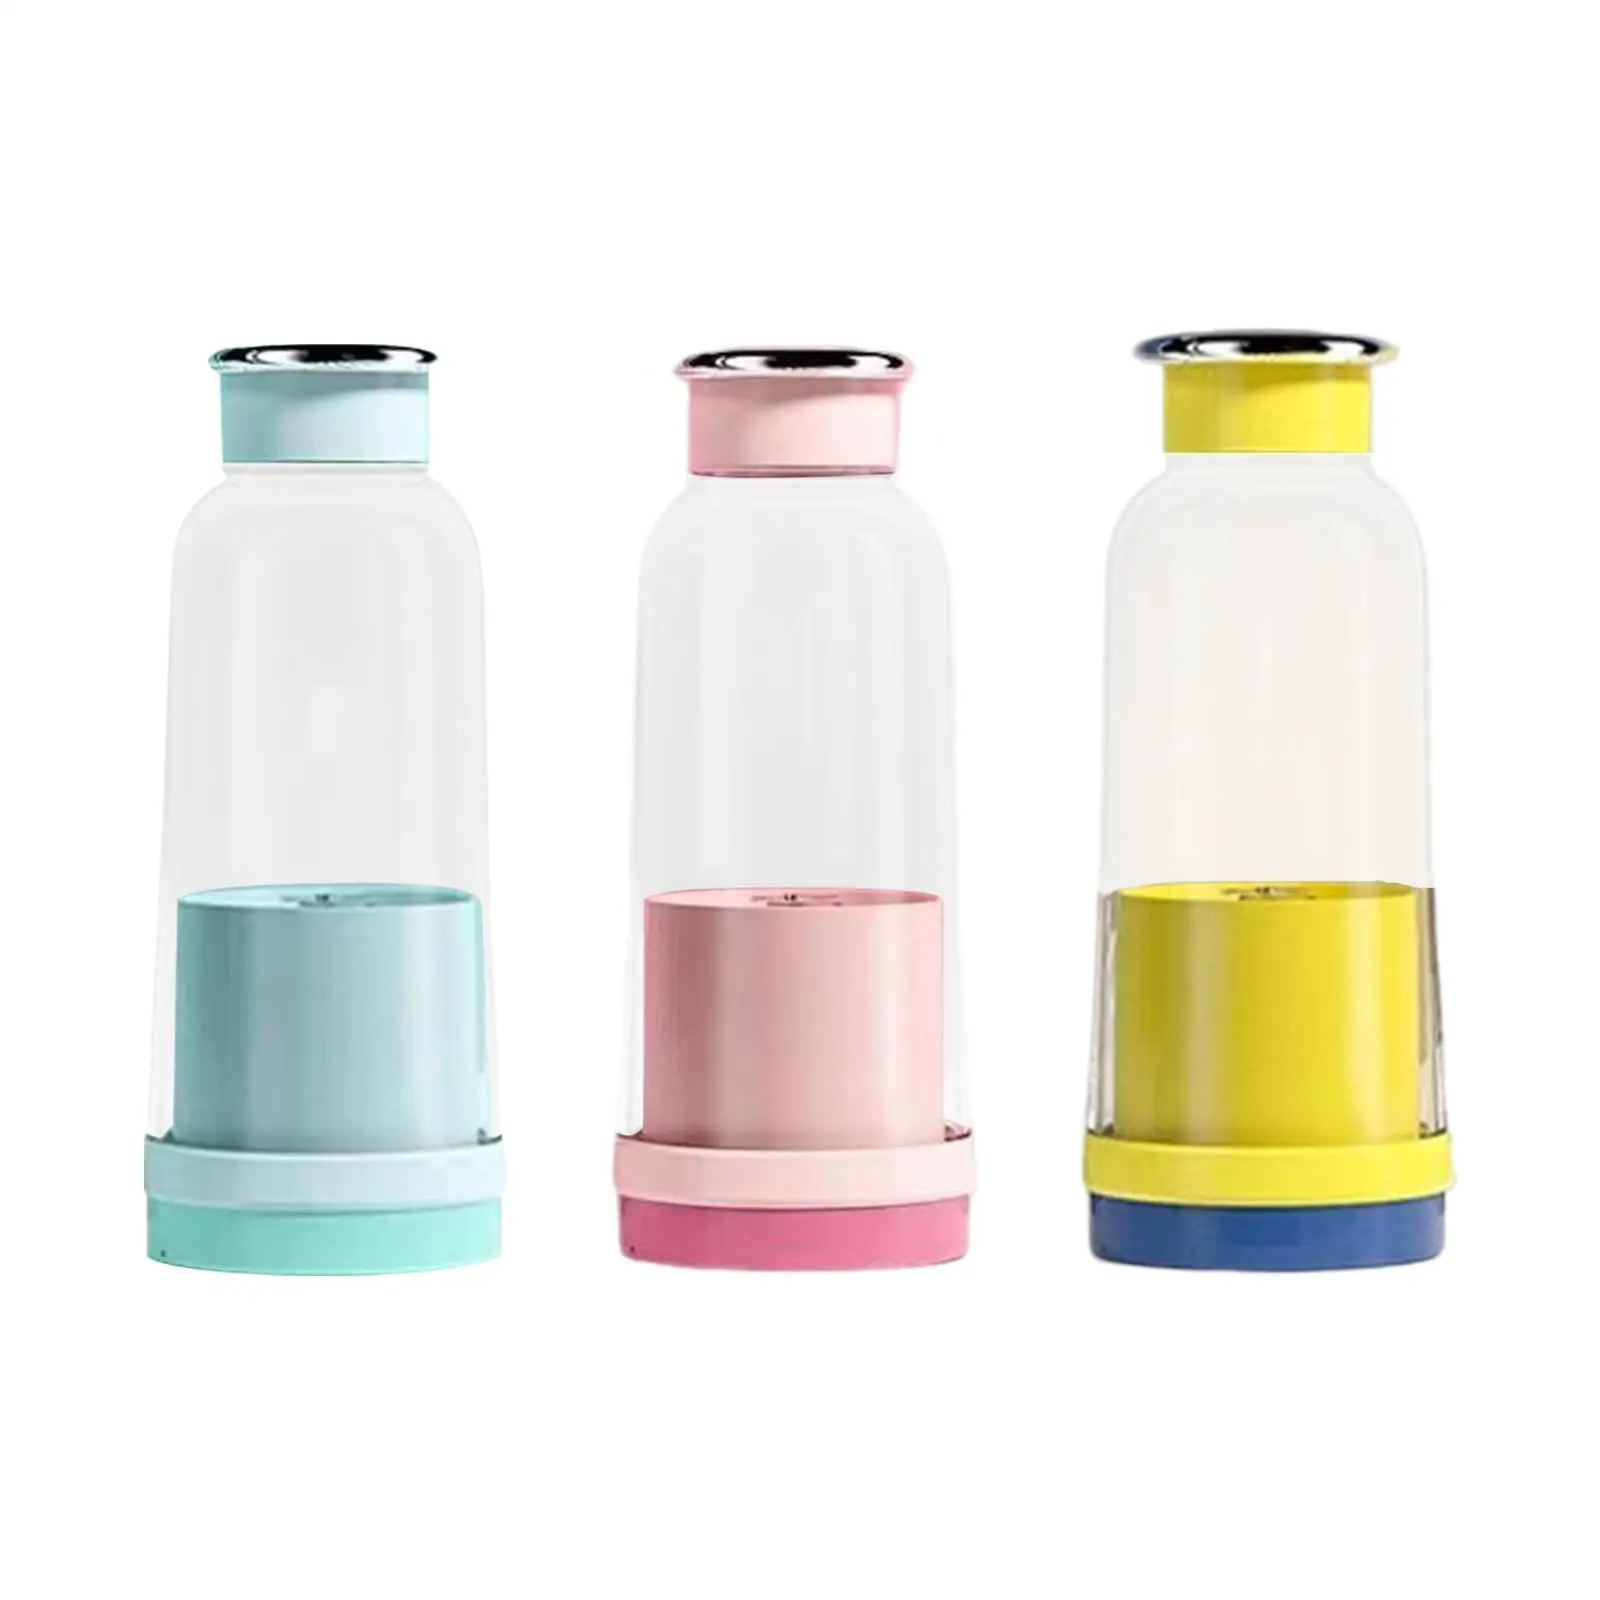 Handheld Juice Cup Personal Juicer Food Fruit Mixer Quick Juicing Shaker Blender Smoothie for Travel Home Household Gym Camping